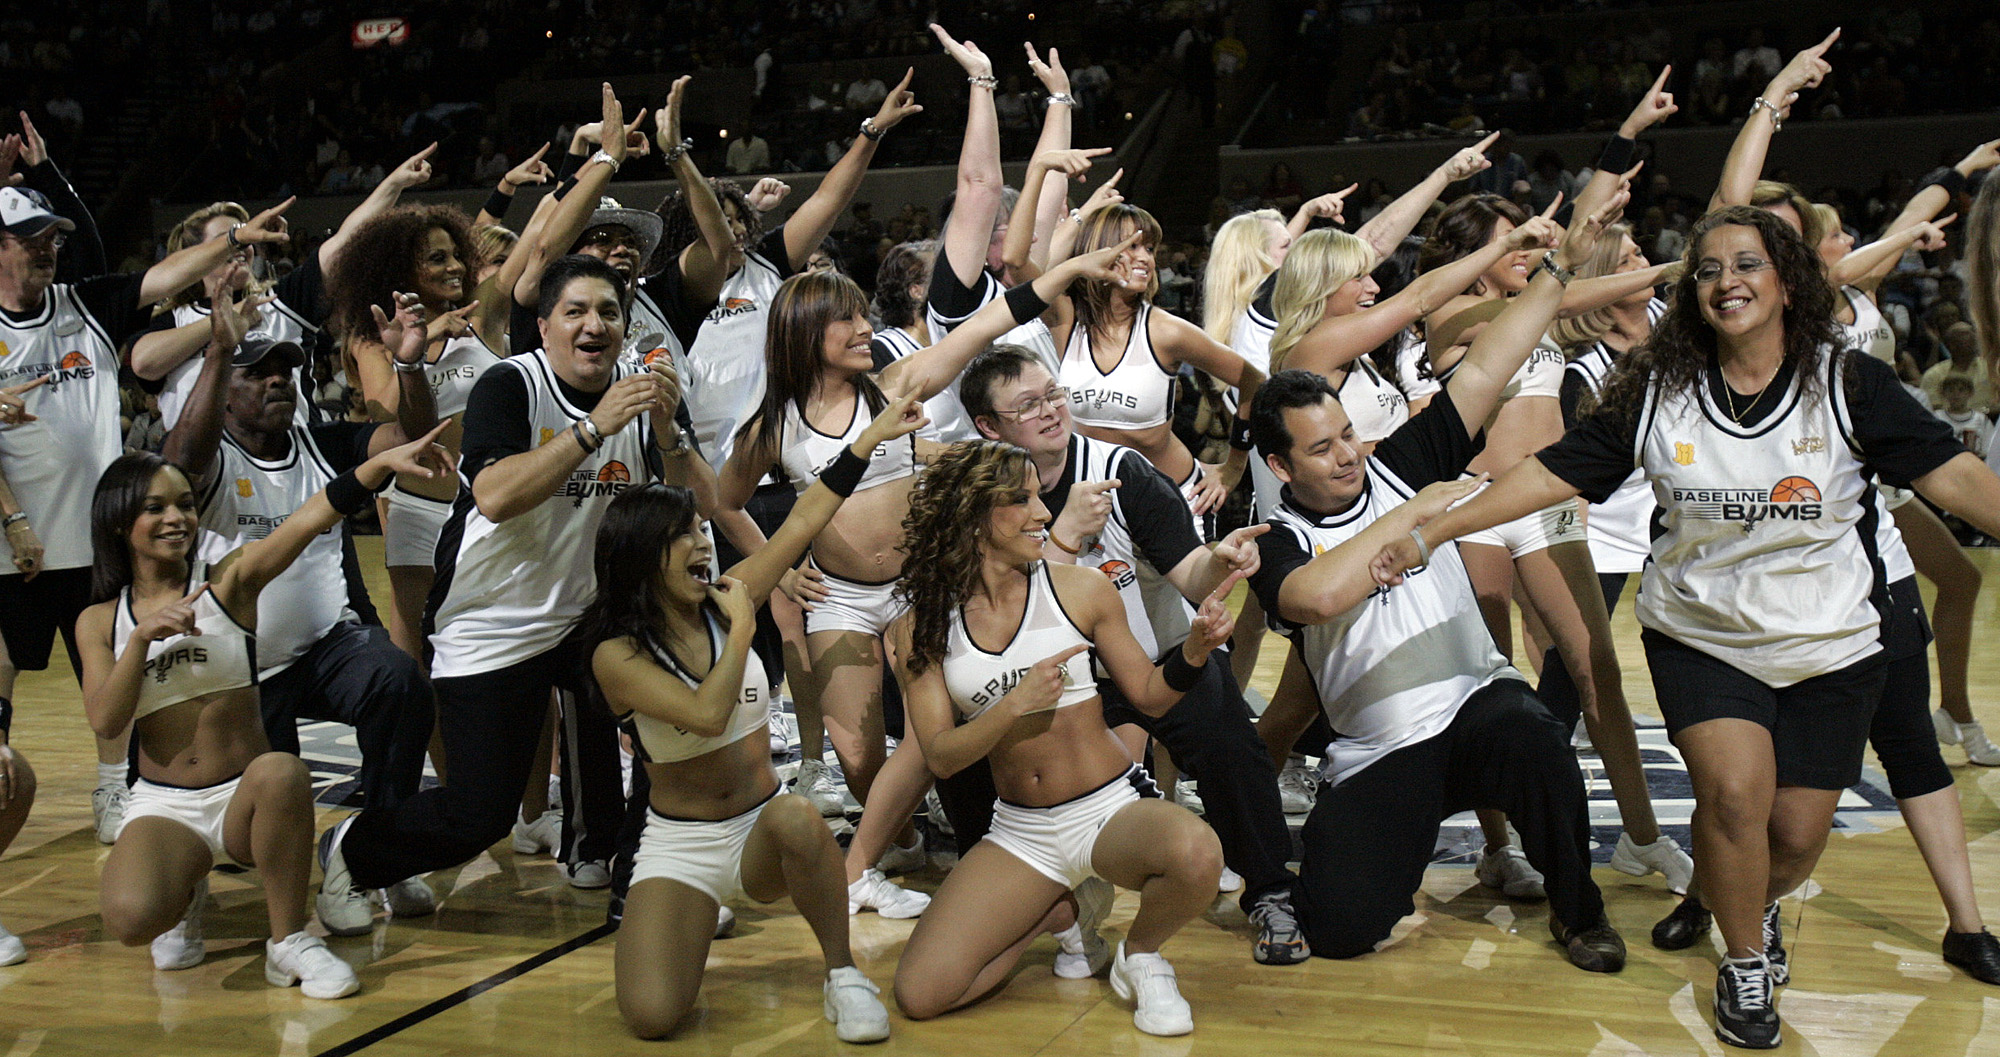 NBA Teams Are Eliminating All-Female Dance Squads